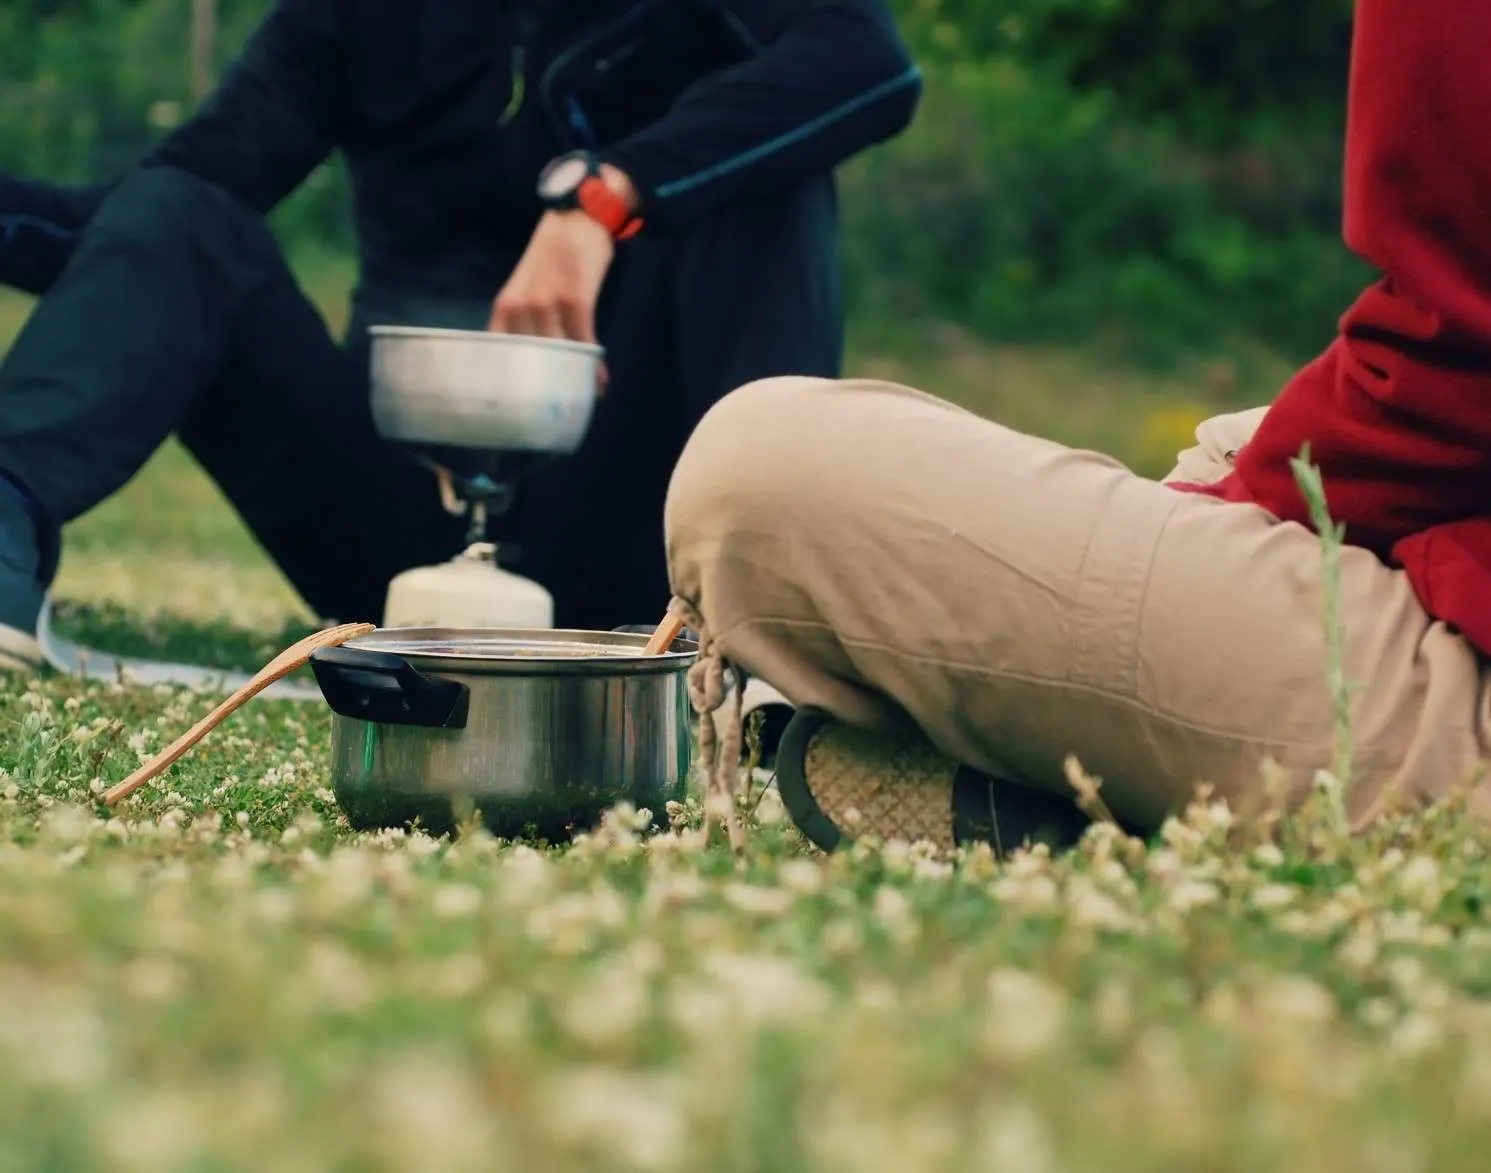 Couple cooking together over camping stove